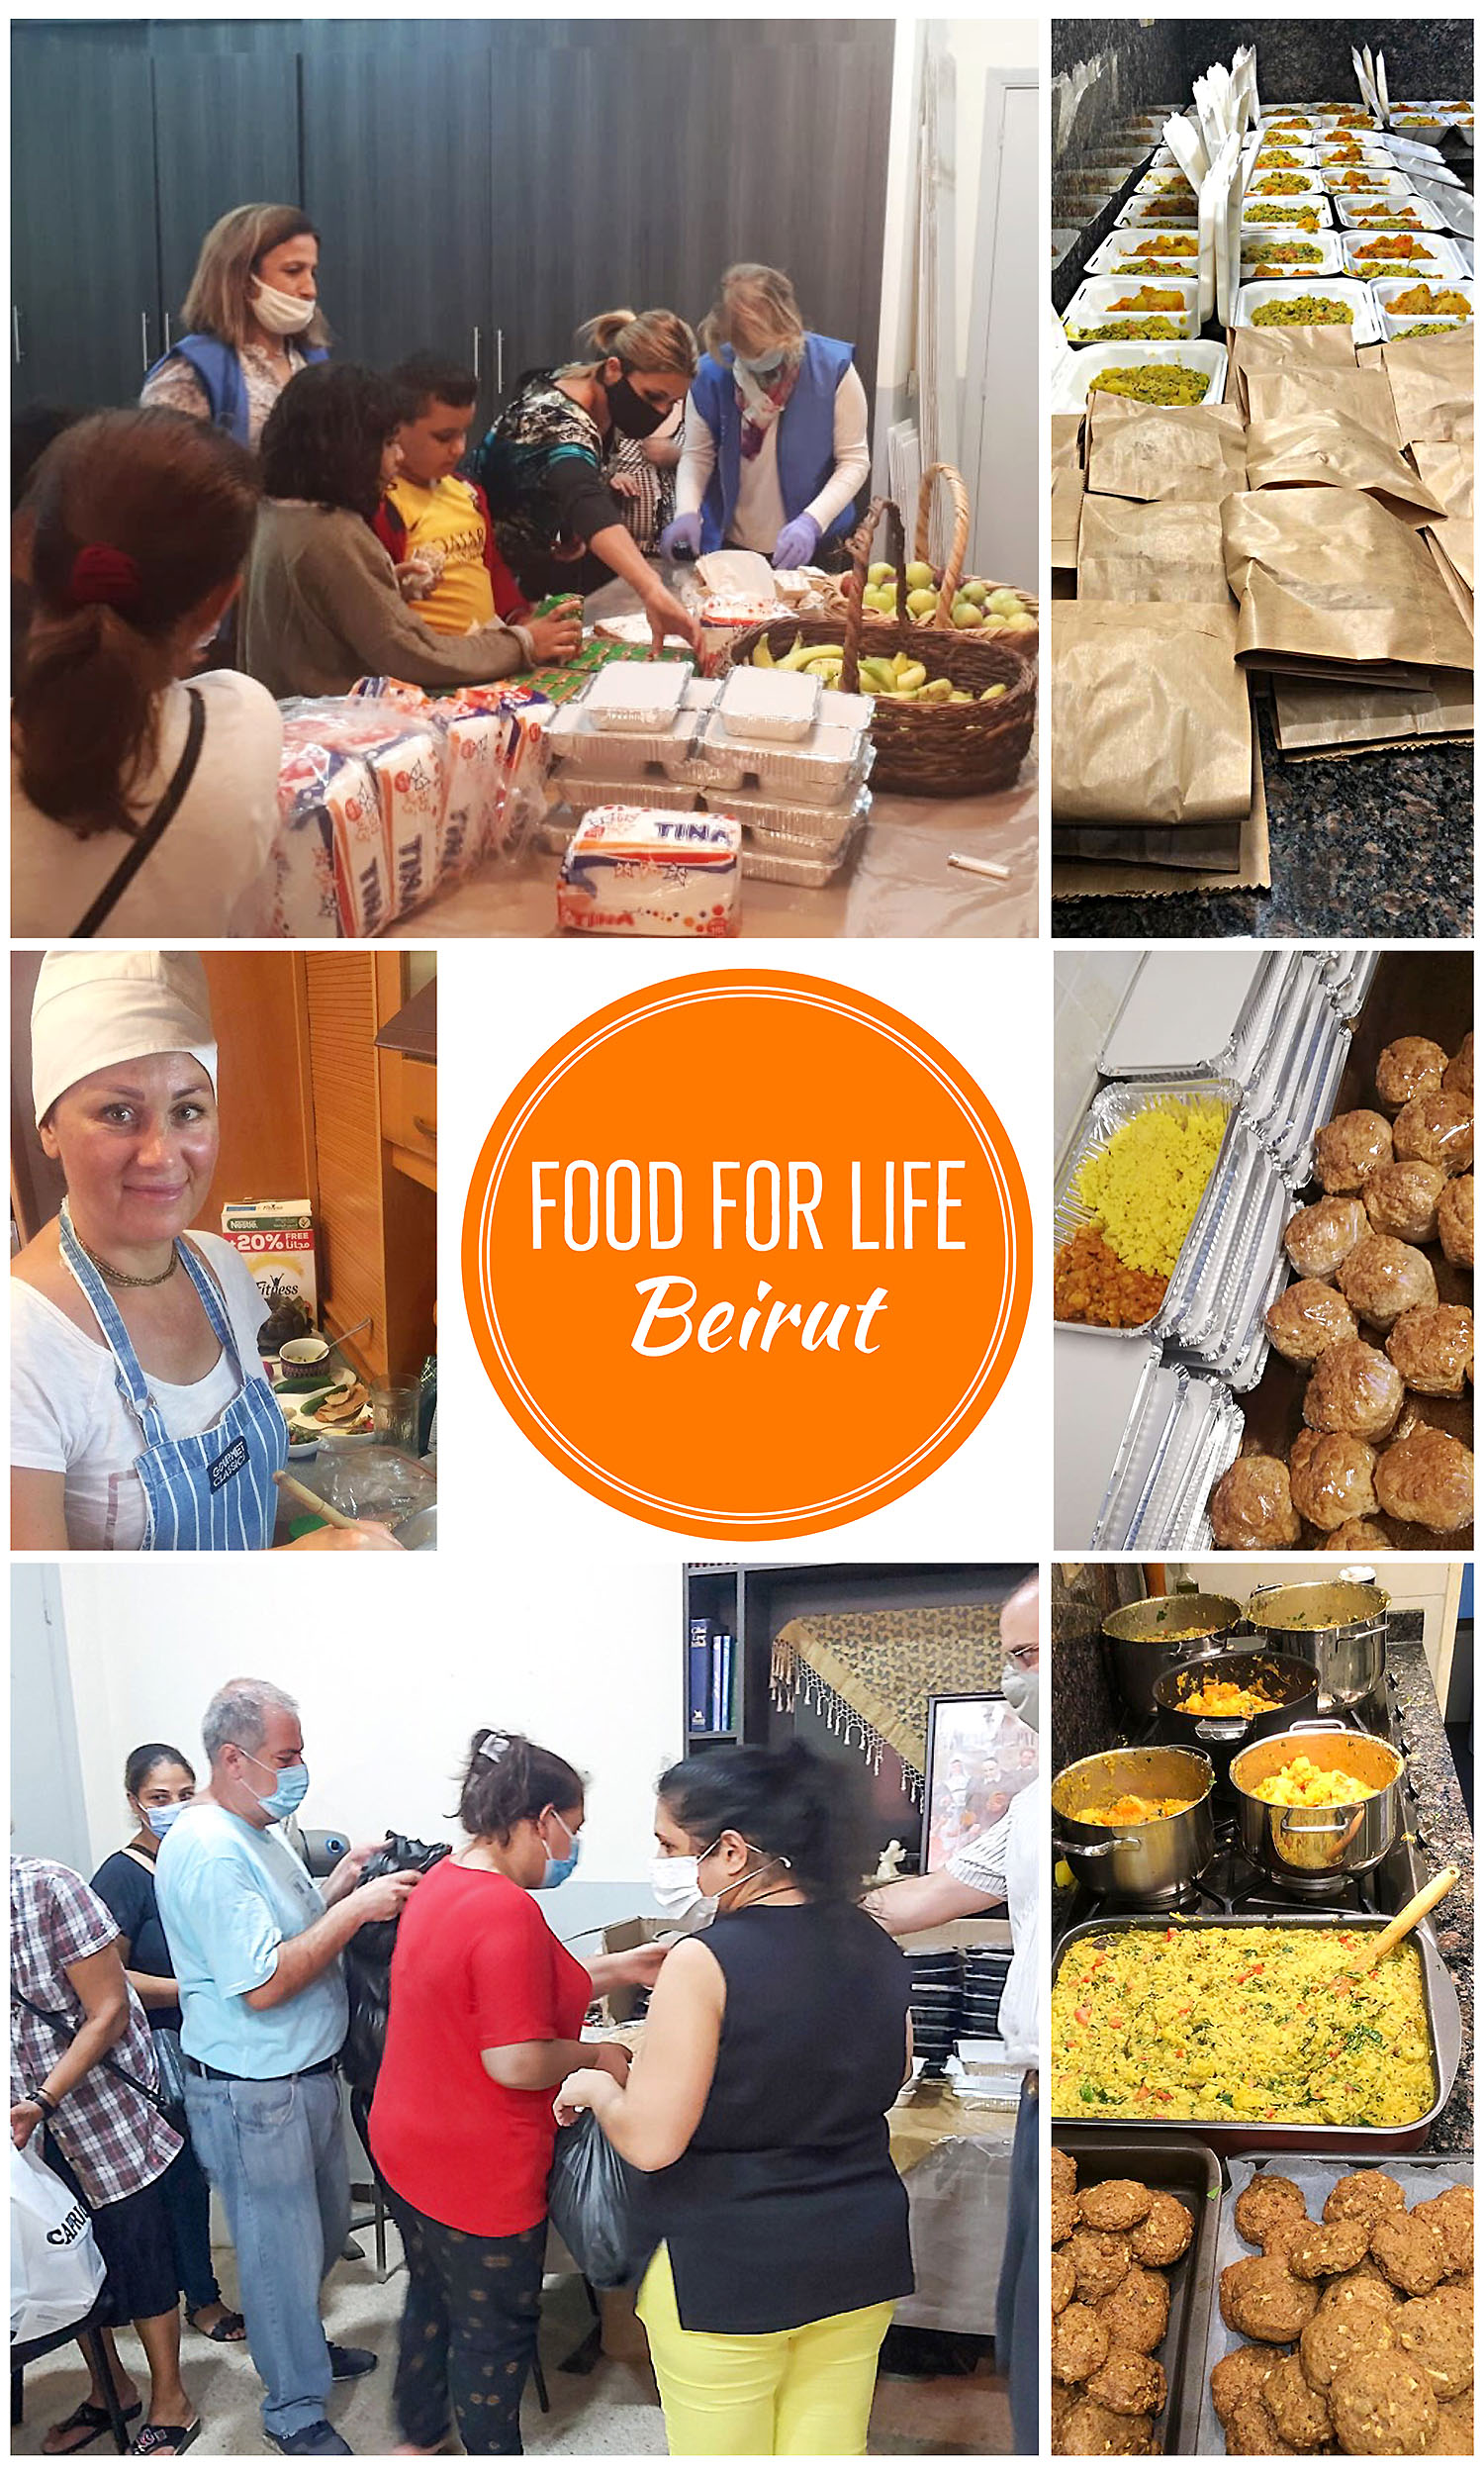 Food for Life Instagram @foodforlife.beirut, charity project, join participate donate for people in need after economic collapse and blast in Beirut Lebanon - home of kirtan Hare Krishna maha mantra